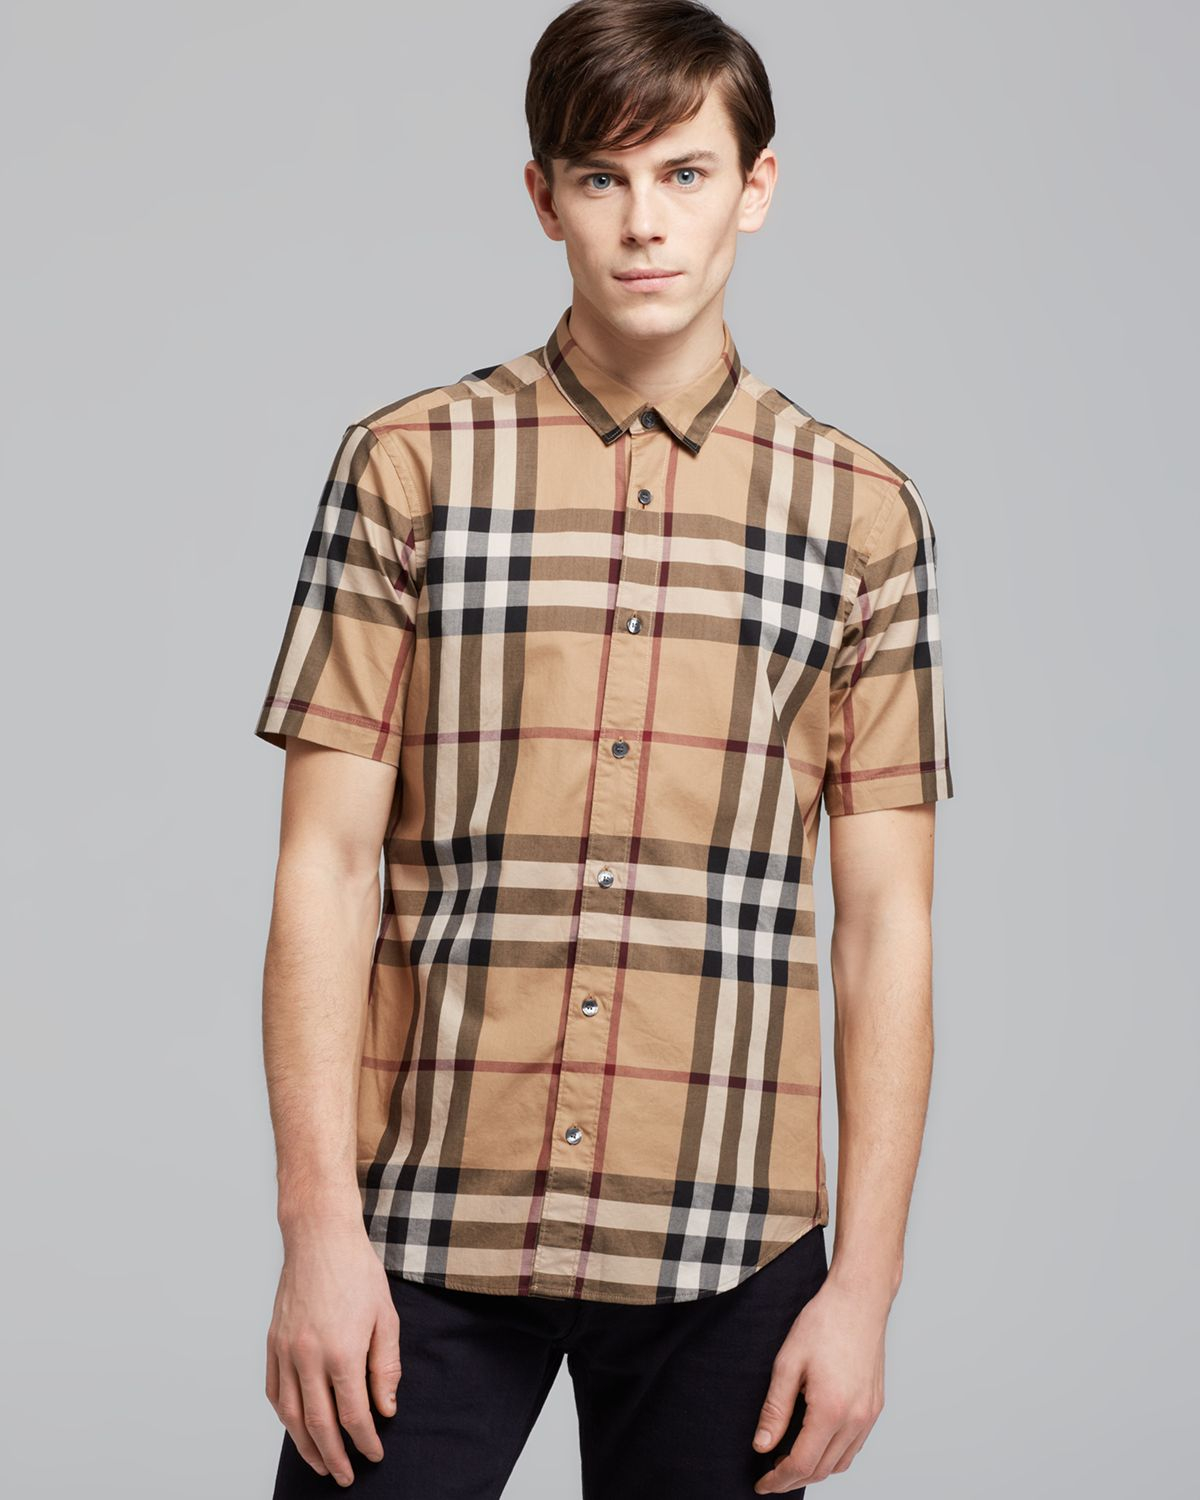 Lyst - Burberry Brit Rhys Plaid Sport Shirt Classic Fit in Natural for Men